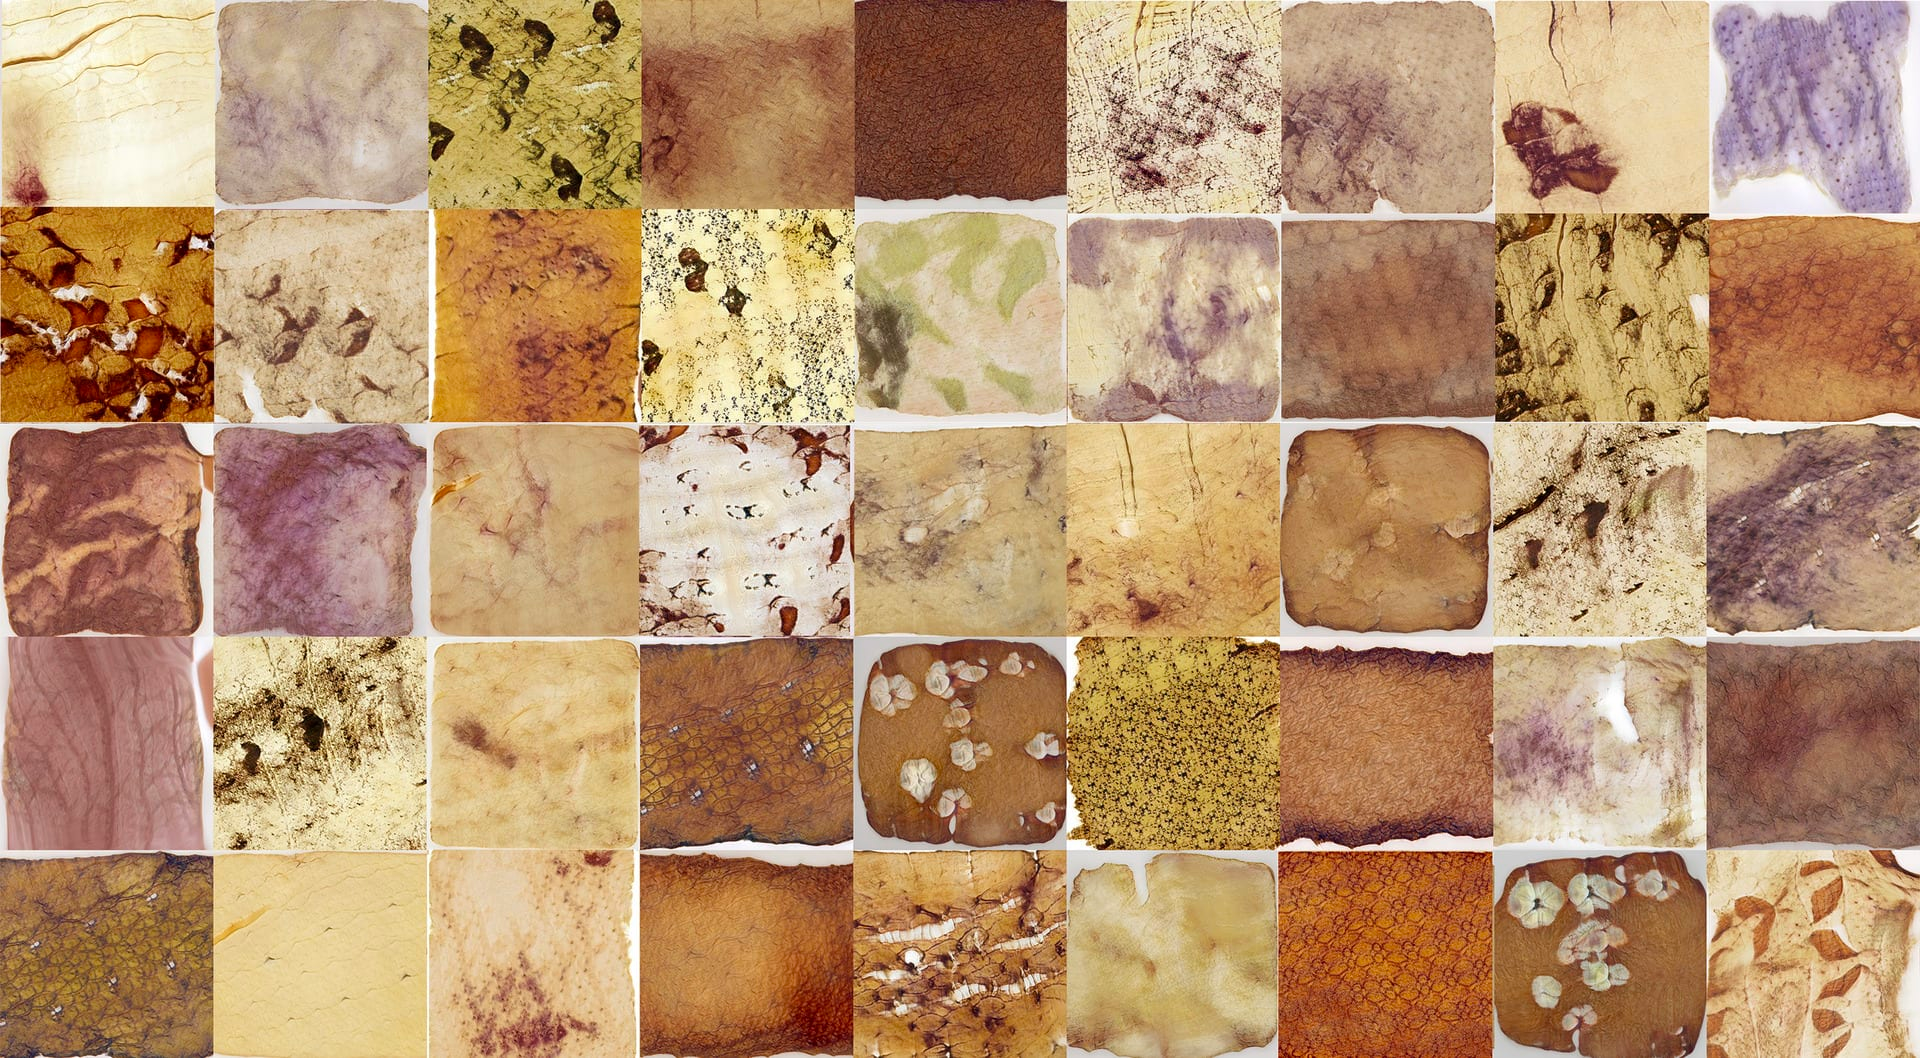 Image of 45 smaller square images, mostly in shades of brown, arranged in five rows of nine.